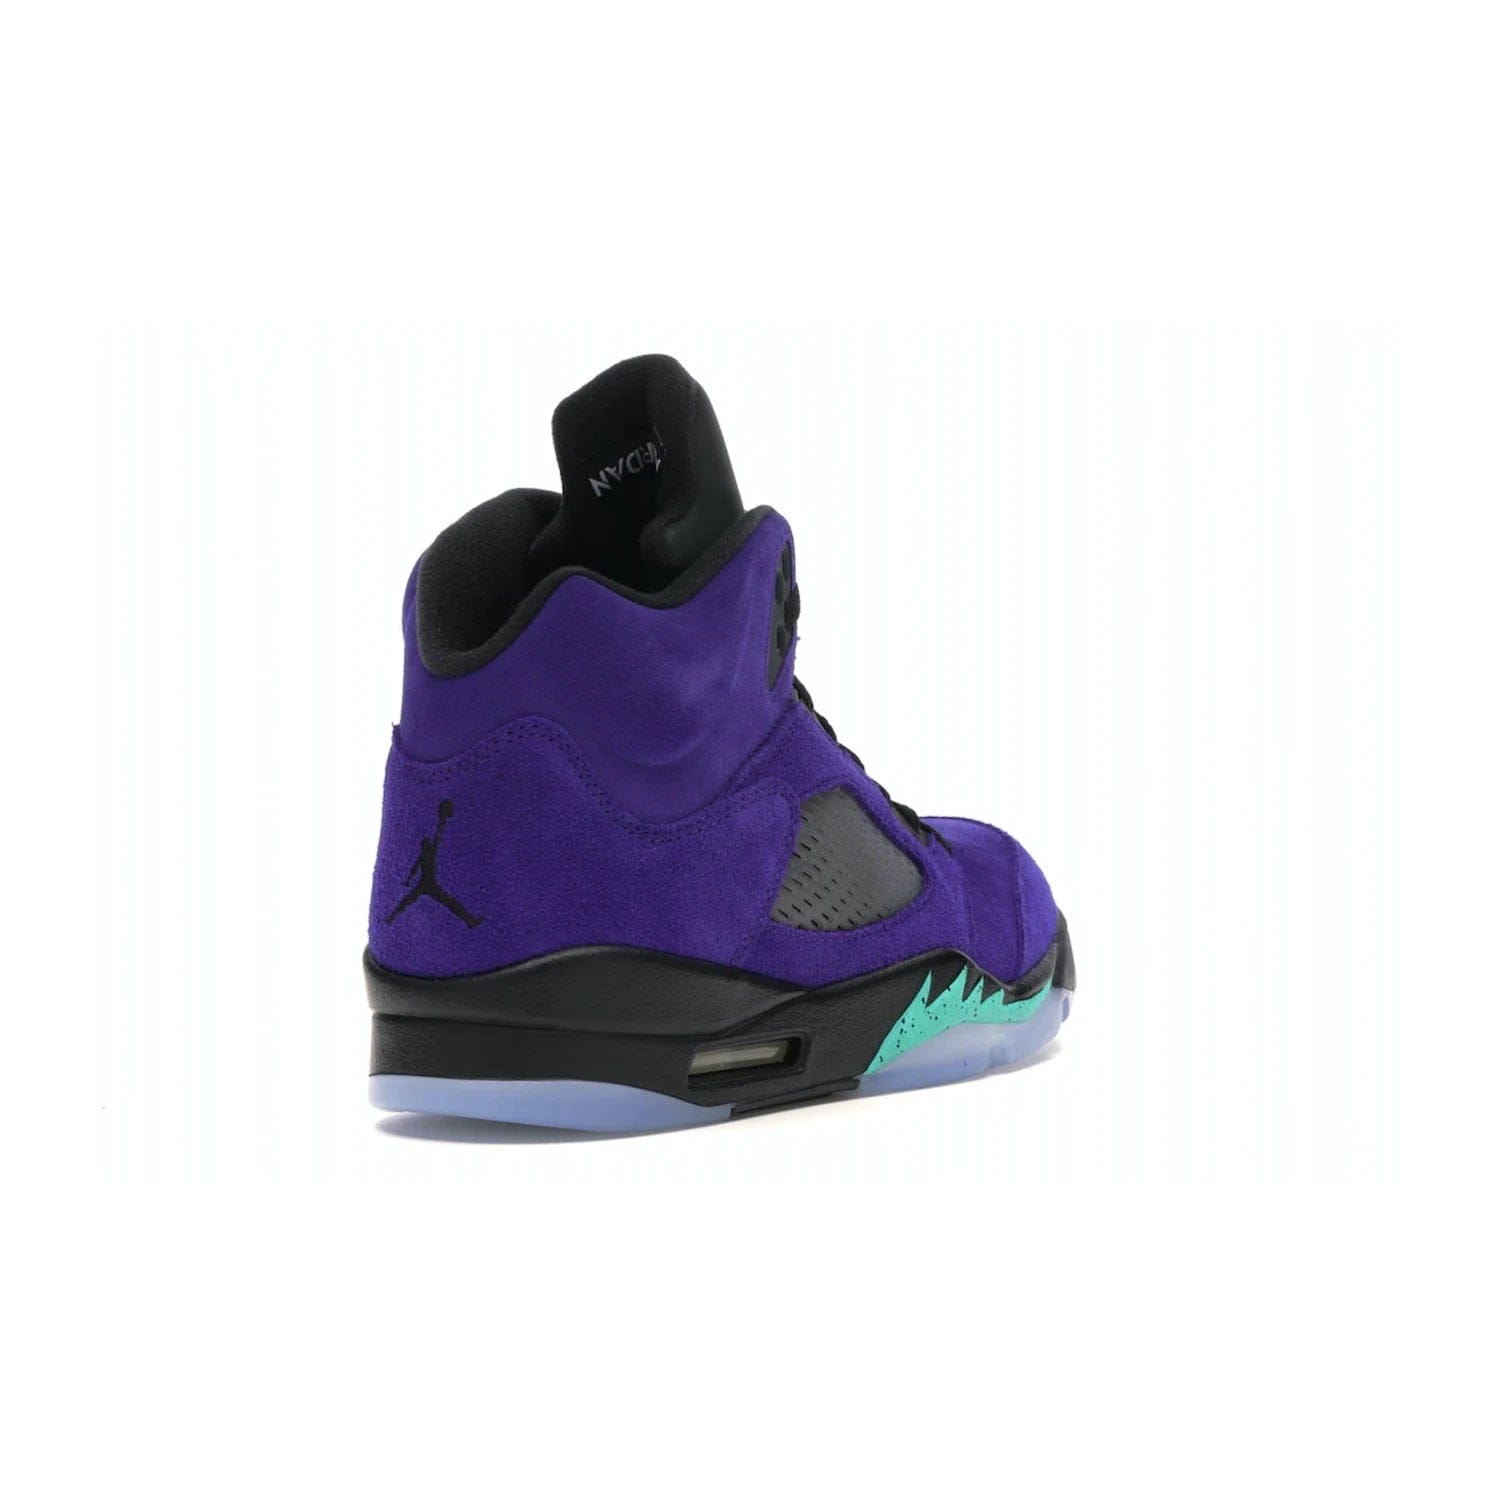 Jordan 5 Retro Alternate Grape - Image 31 - Only at www.BallersClubKickz.com - Bring the classic Jordan 5 Retro Alternate Grape to your sneaker collection! Featuring a purple suede upper, charcoal underlays, green detailing, and an icy and green outsole. Releasing for the first time since 1990, don't miss this chance to add a piece of sneaker history to your collection.